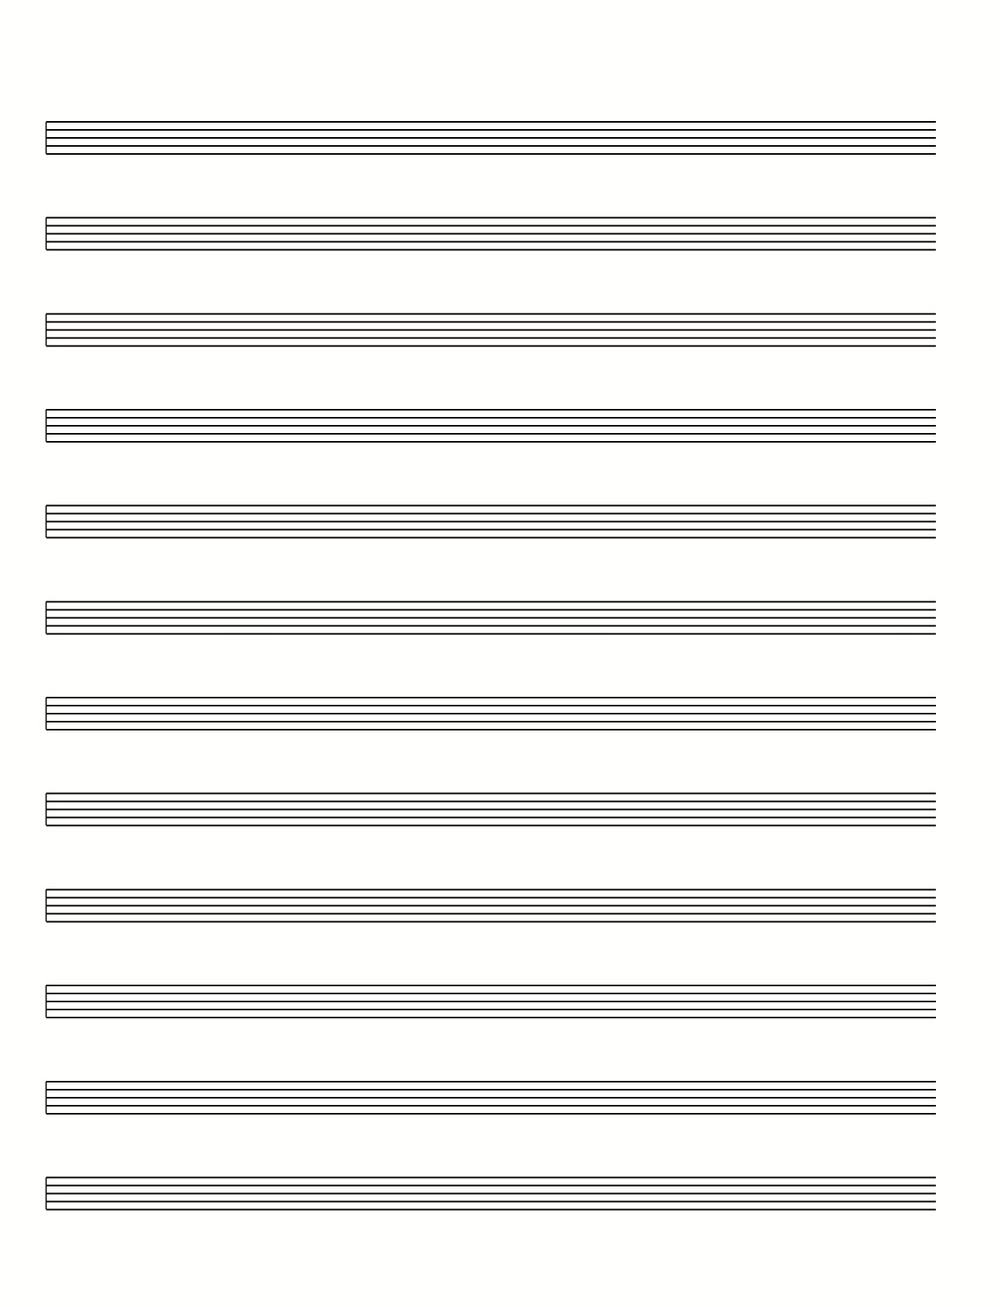 Blank Guitar Music Sheet Word Document pertaining to Blank Sheet Music Template For Word